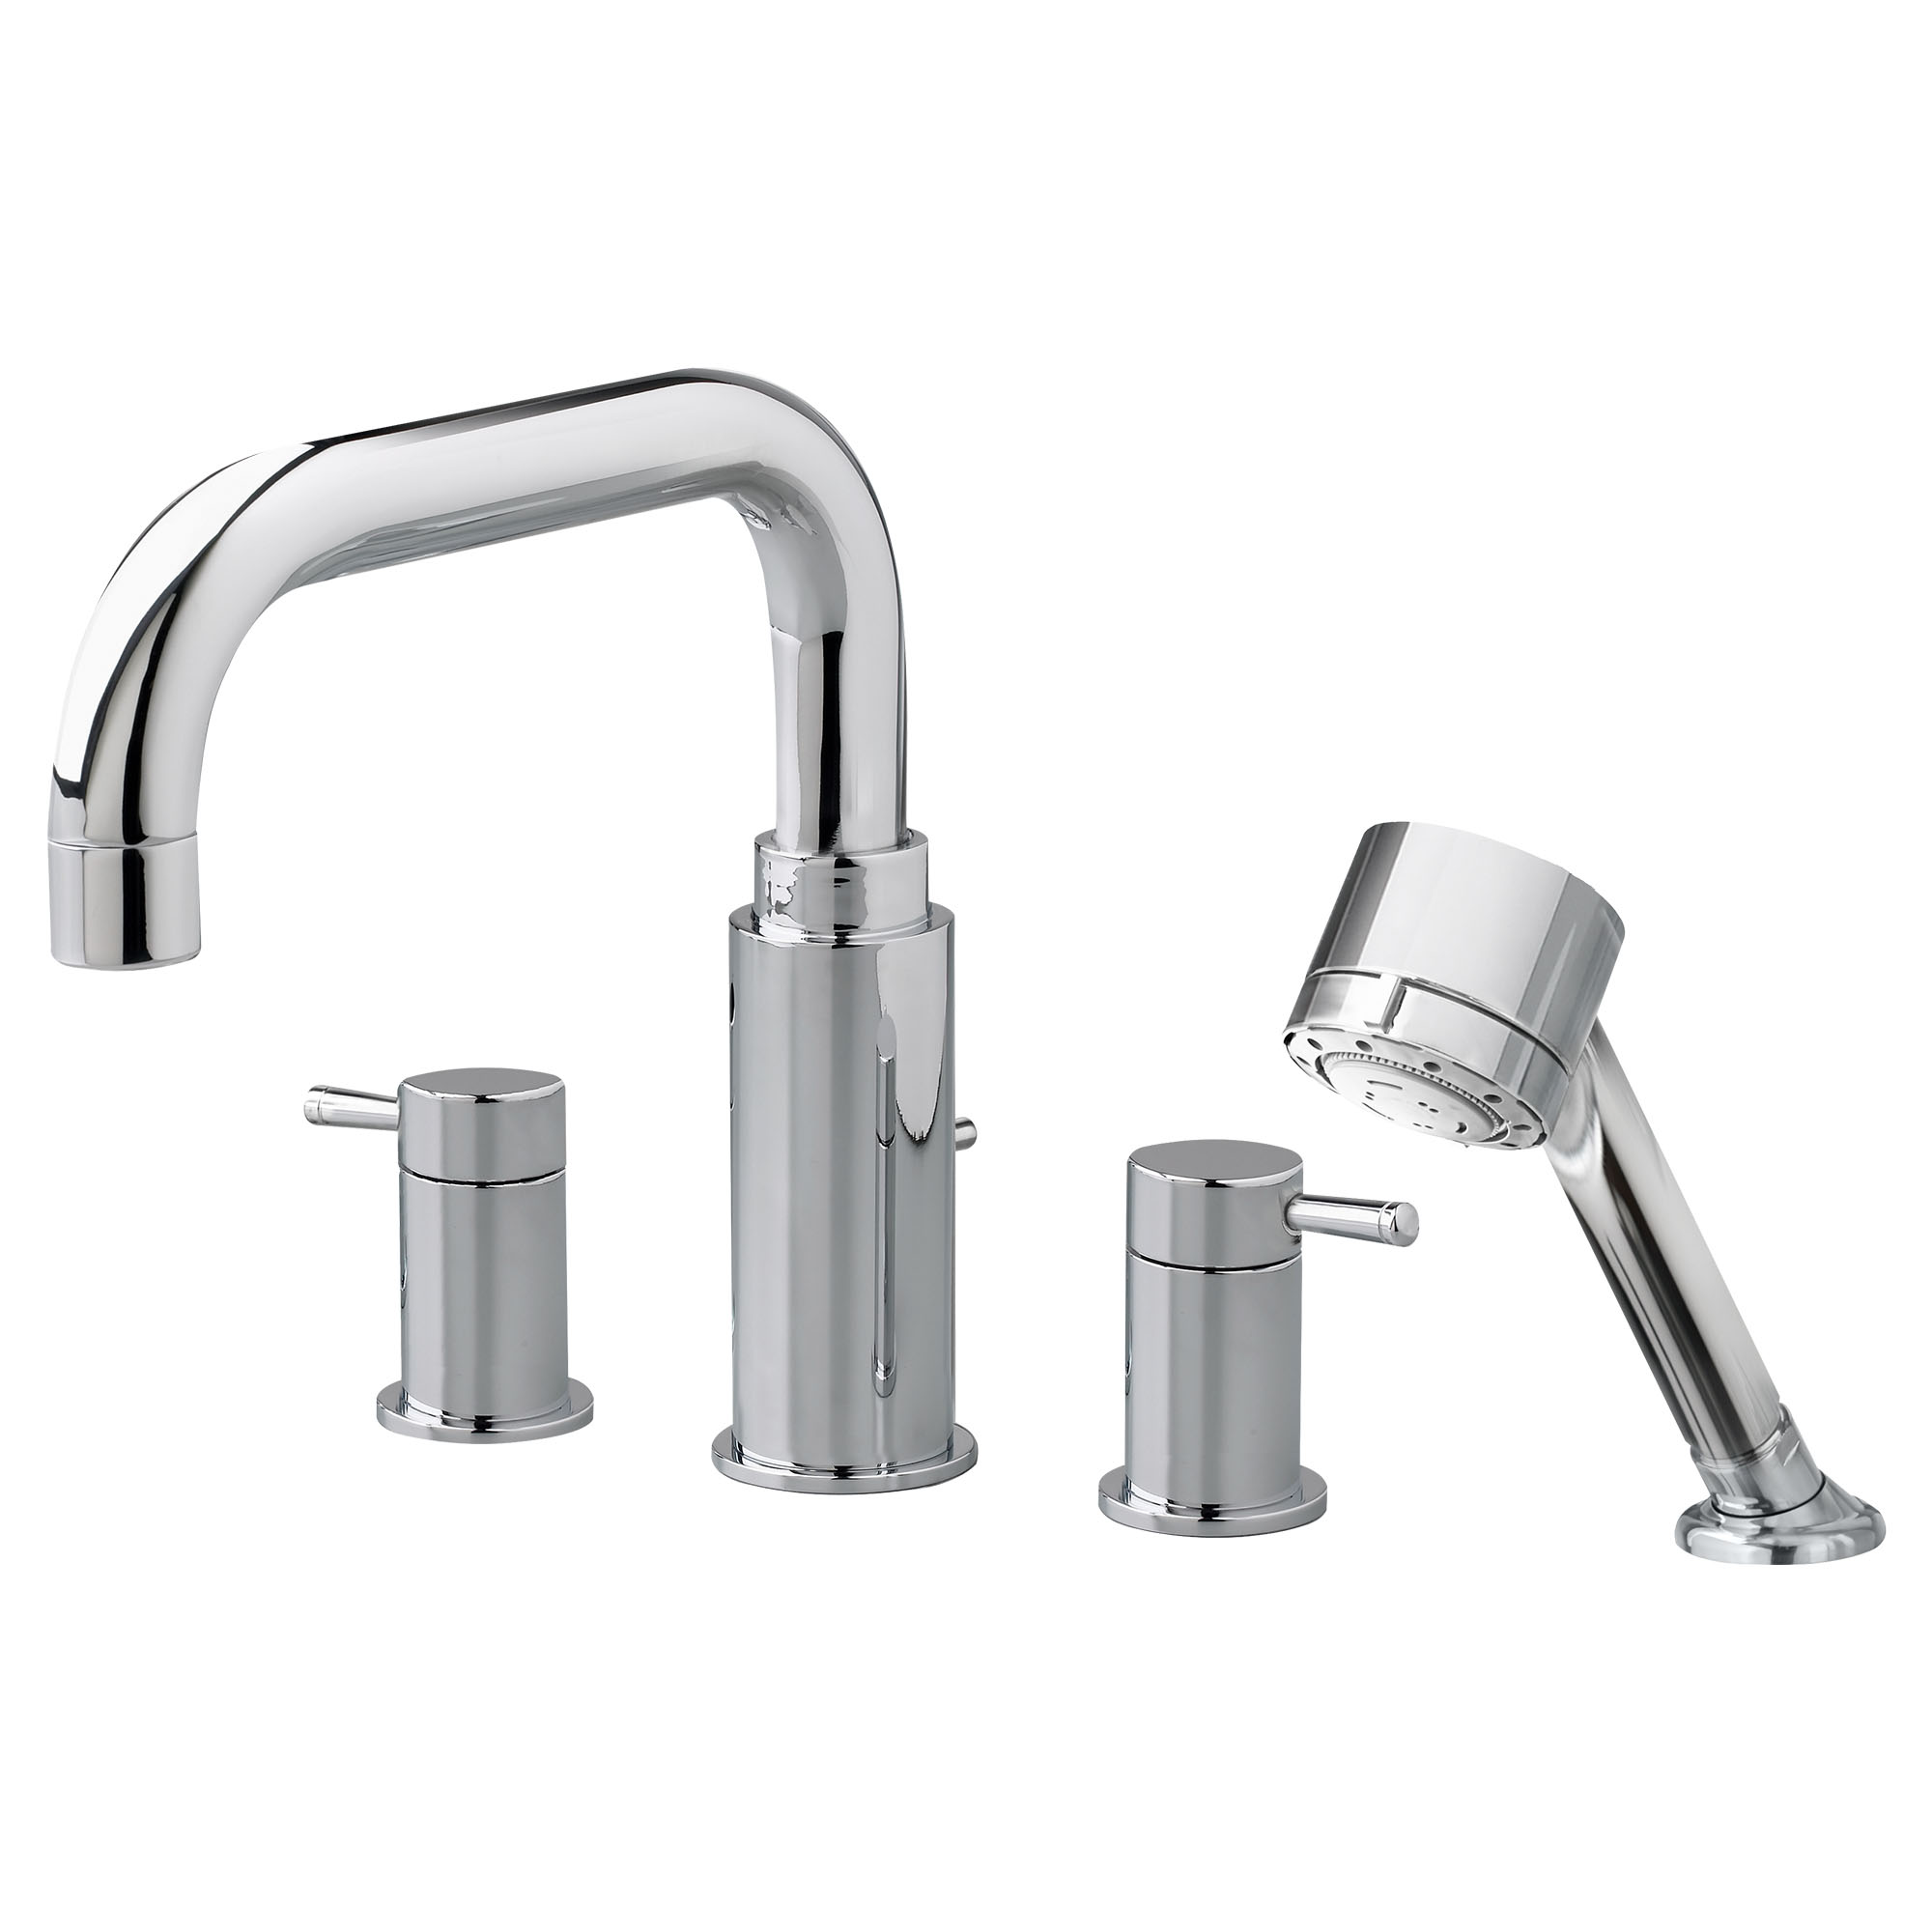 Serin® Bathtub Faucet With Lever Handles and Personal Shower for Flash® Rough-In Valve